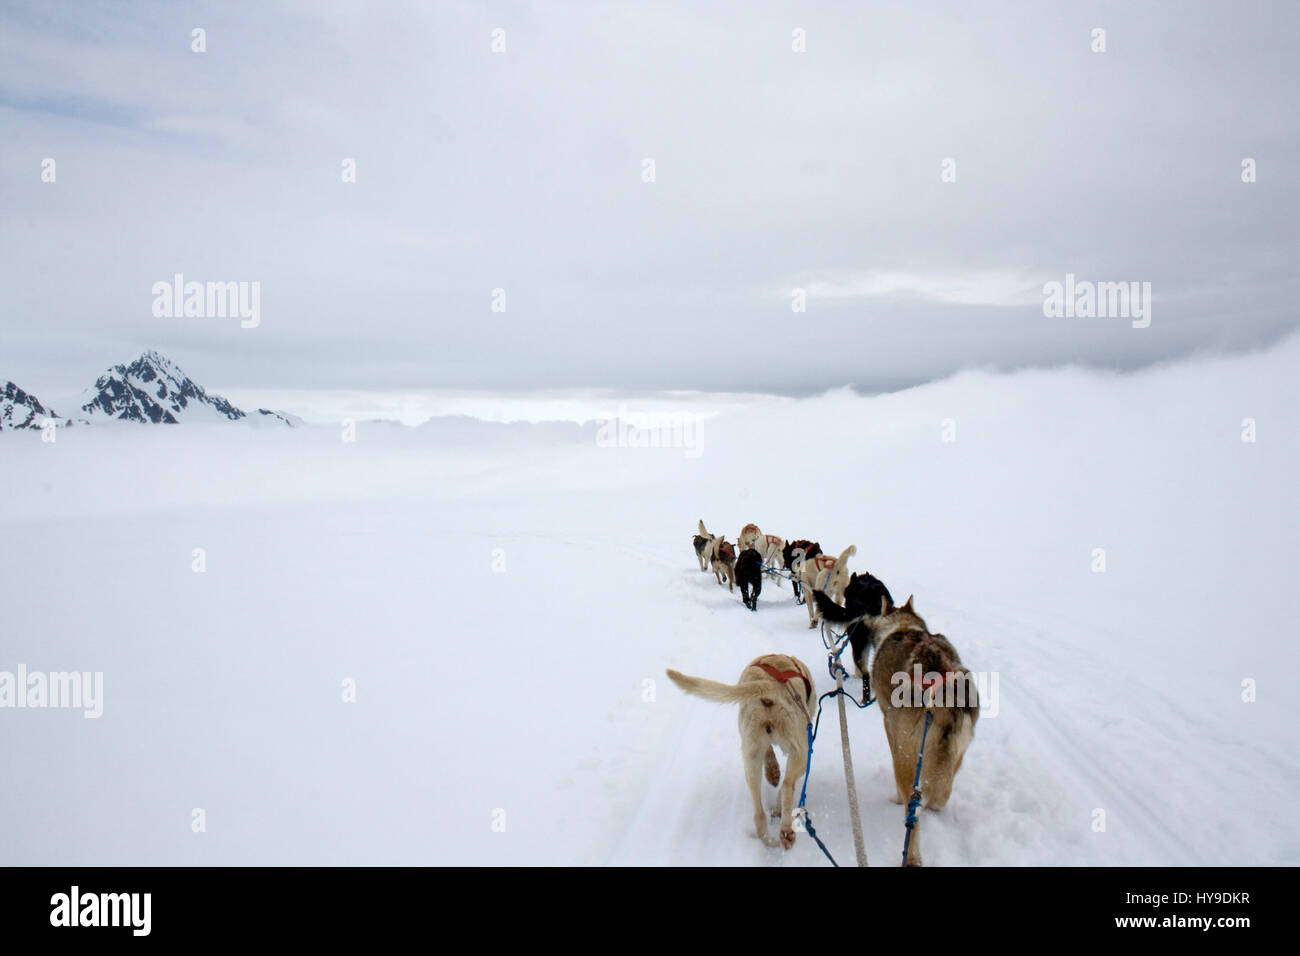 View from the sled being pulled by dogs across the snow in Alaska. Stock Photo